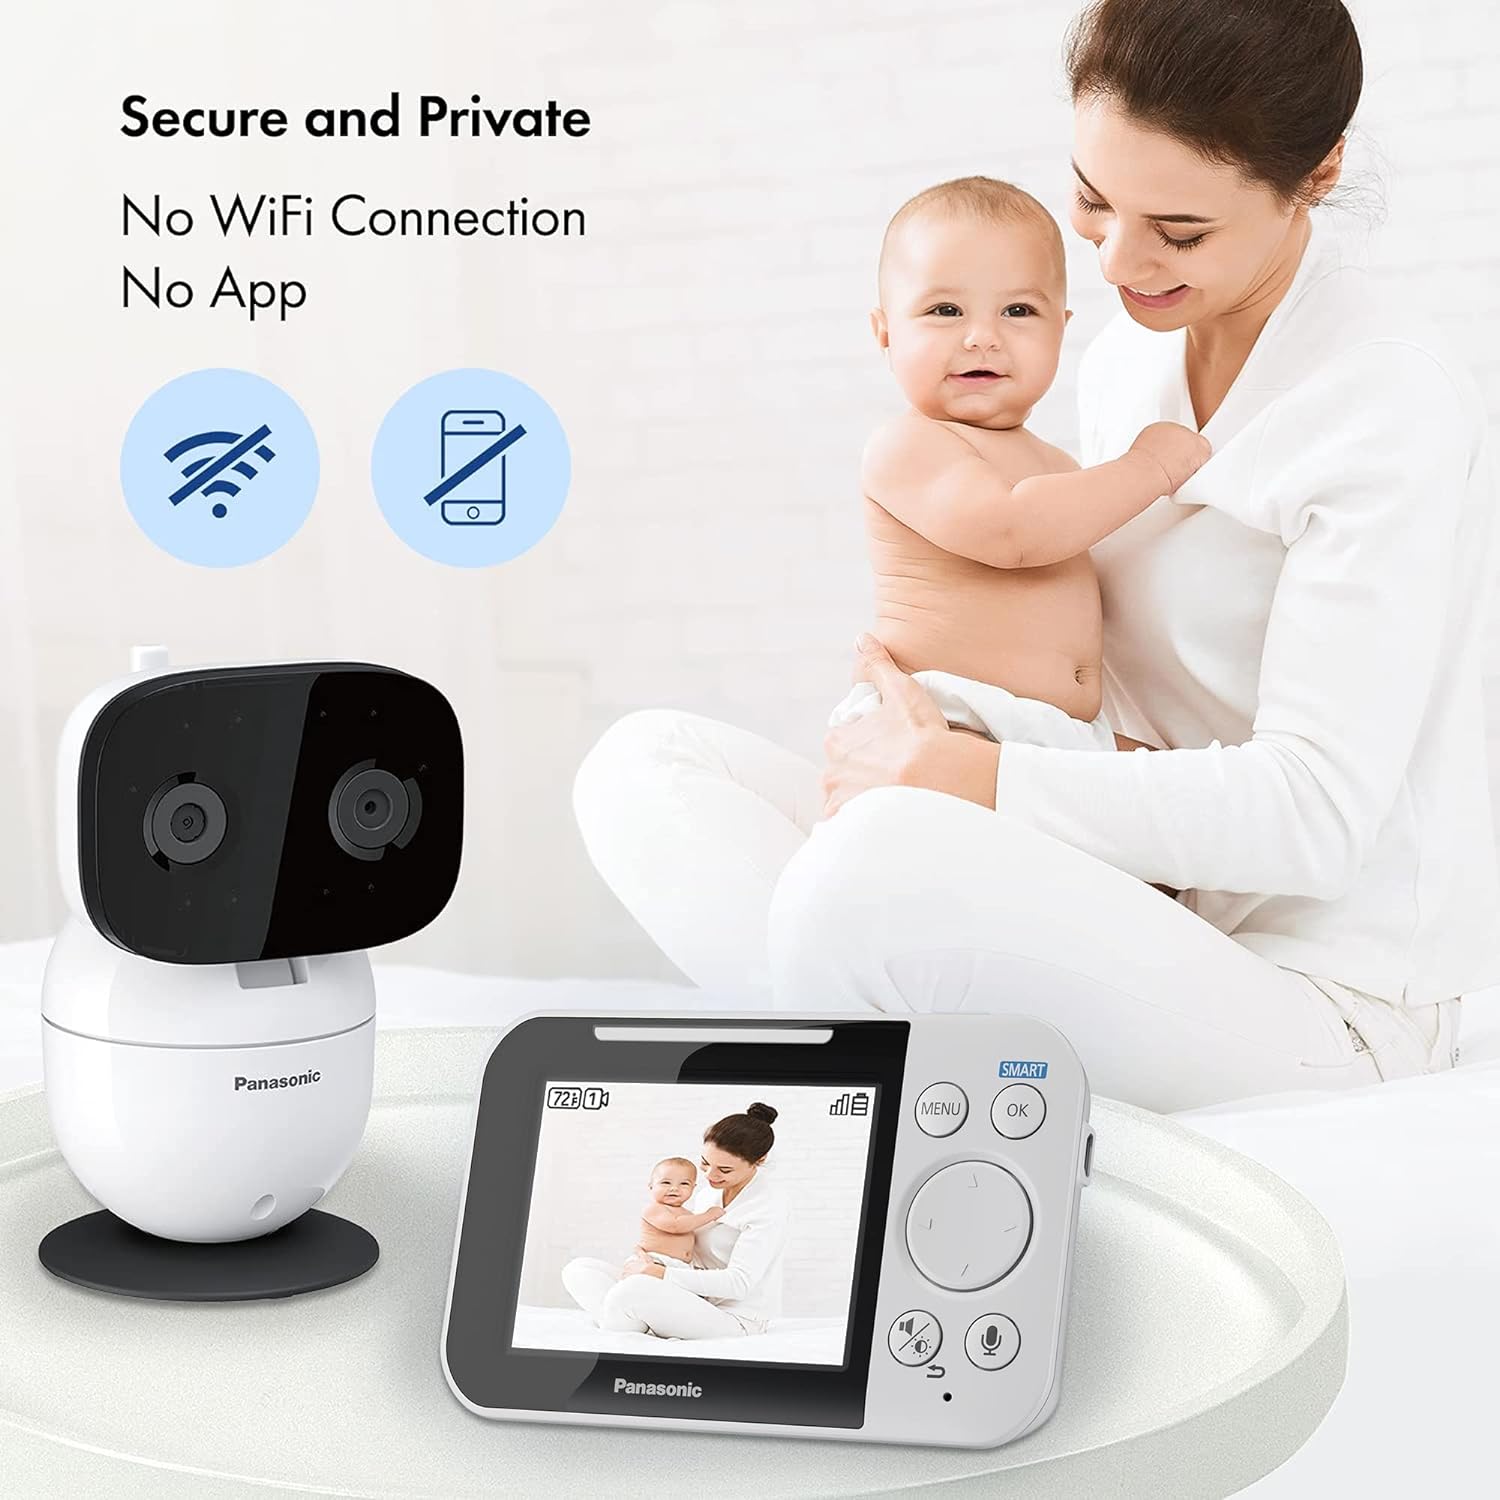 Panasonic Baby Monitor with Camera and Audio, 3.5” Color Video Baby Monitor, Extra Long Range, Secure Connection, 2-Way Talk, Soothing Sounds, Remote Pan, Tilt, Zoom,1 Camera, KX-HN4001W (White/Black) : Baby